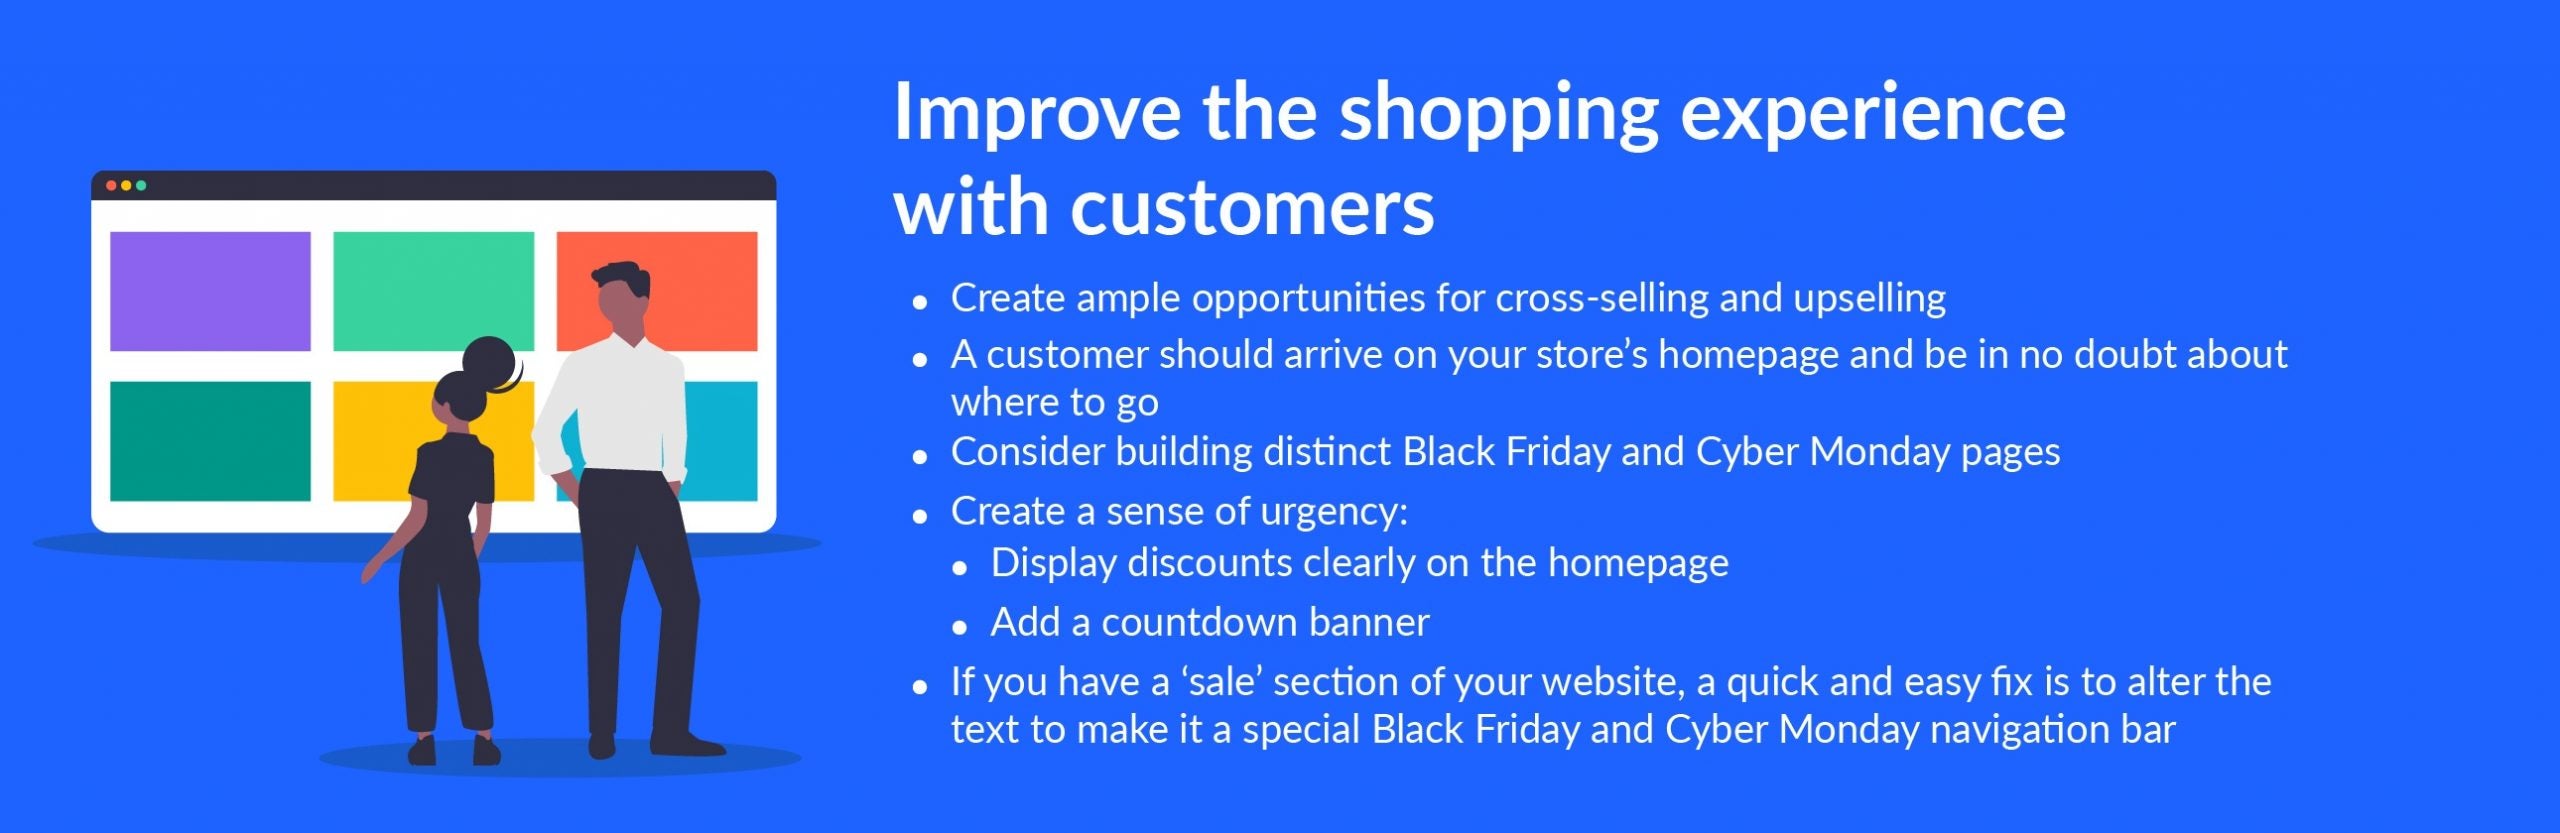 black friday tip improve shopping experience